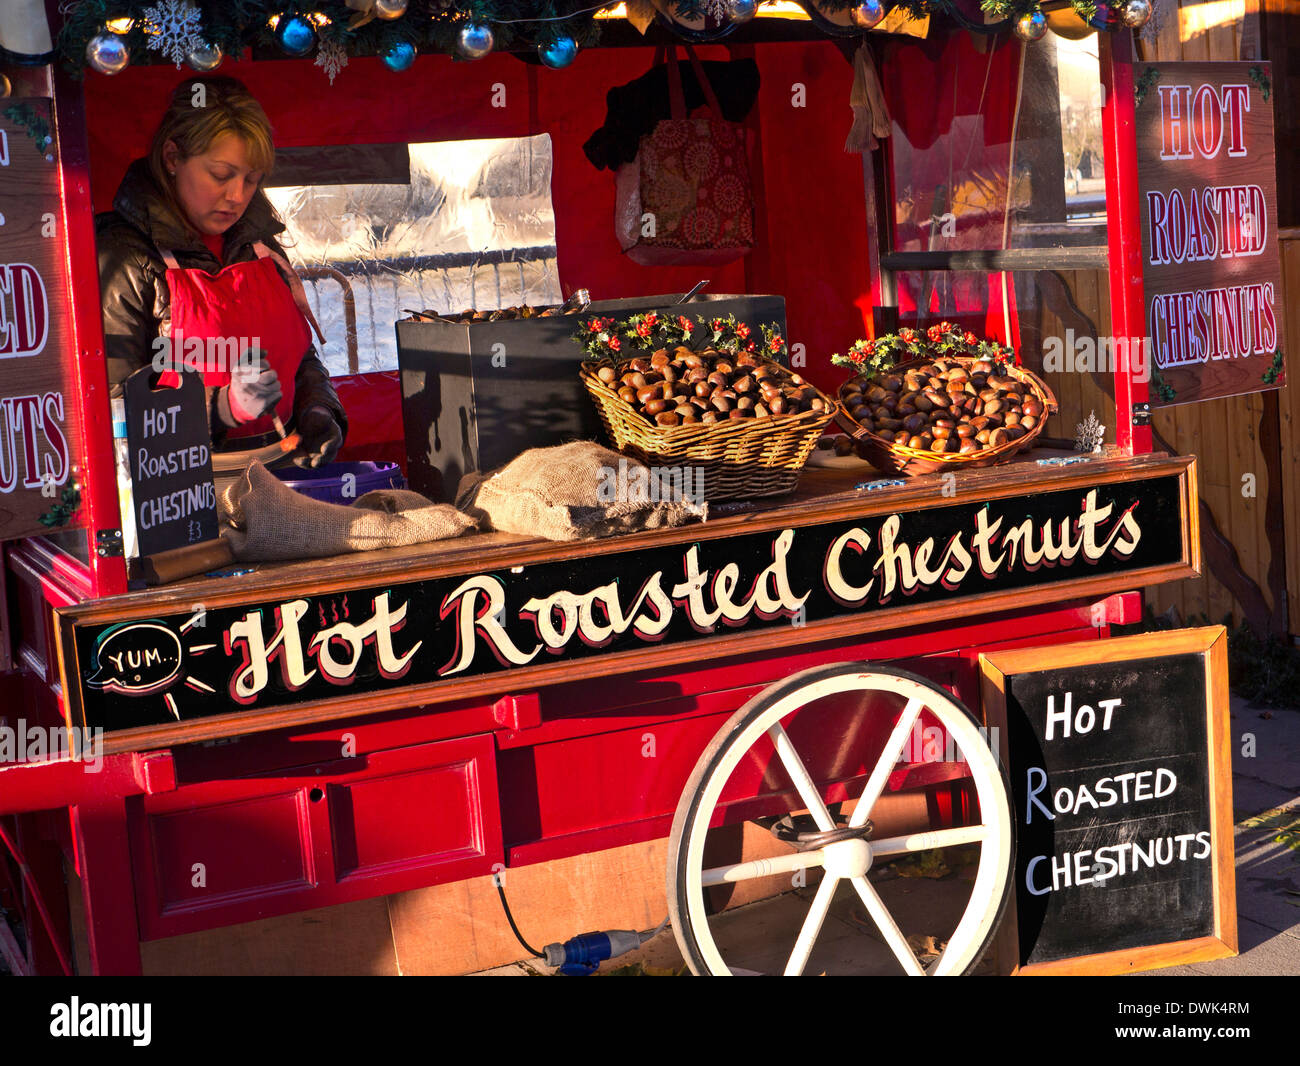 ROASTED CHESTNUTS Traditional Christmas winter market stall 'Hot Roasted Chestnuts' South Bank  London UK Stock Photo